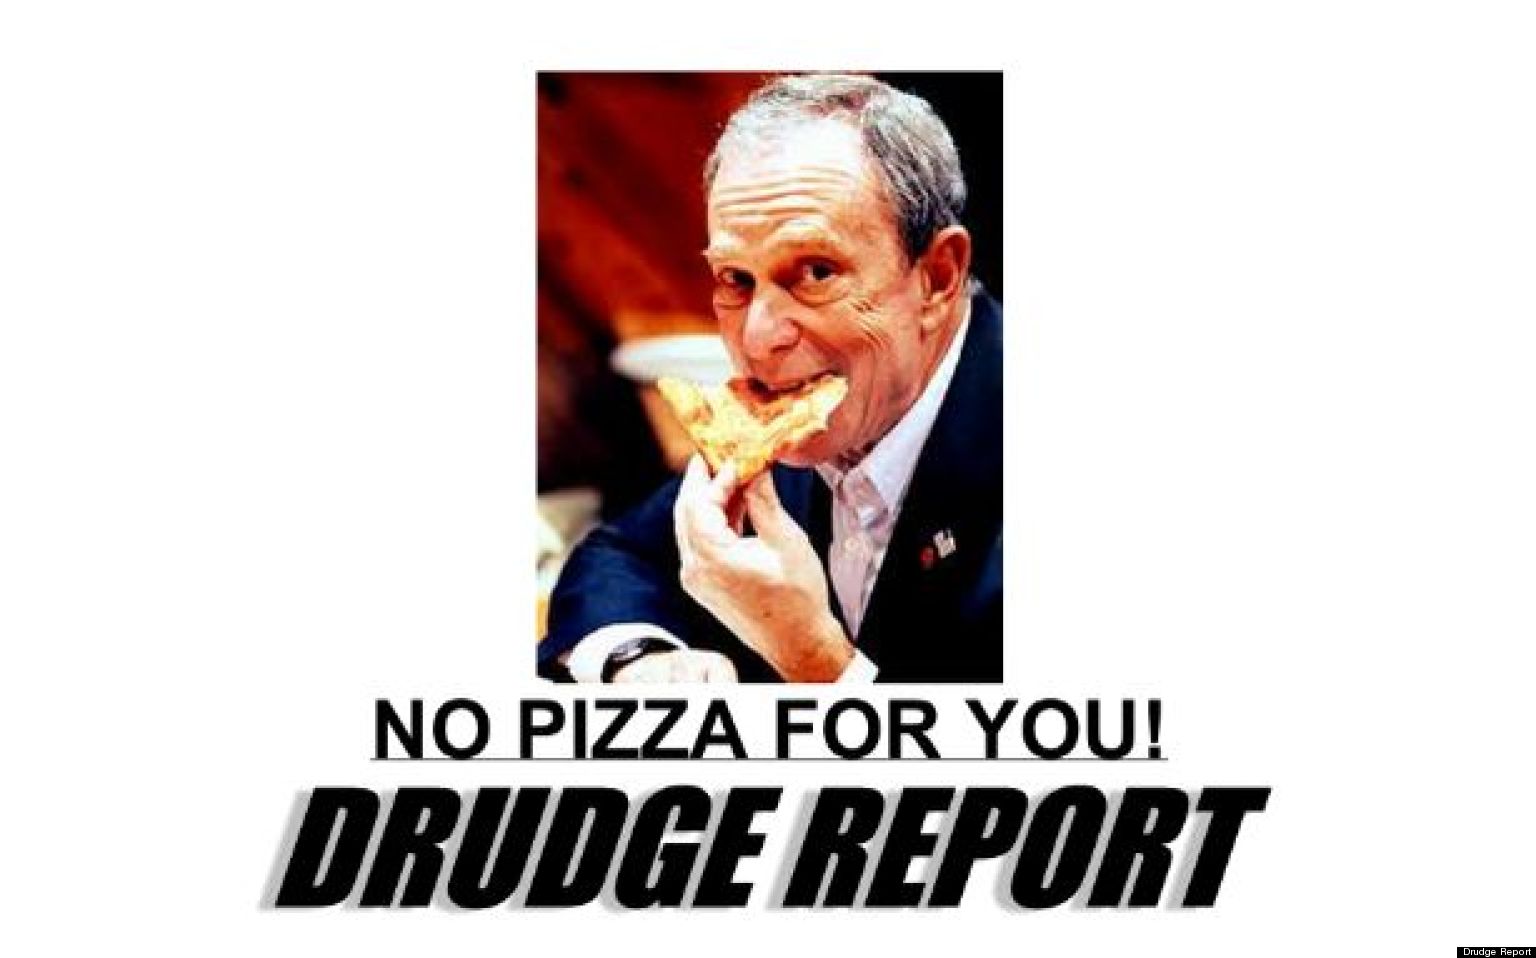 Drudge Report Fooled By Fake Story About Bloomberg Being Denied Pizza